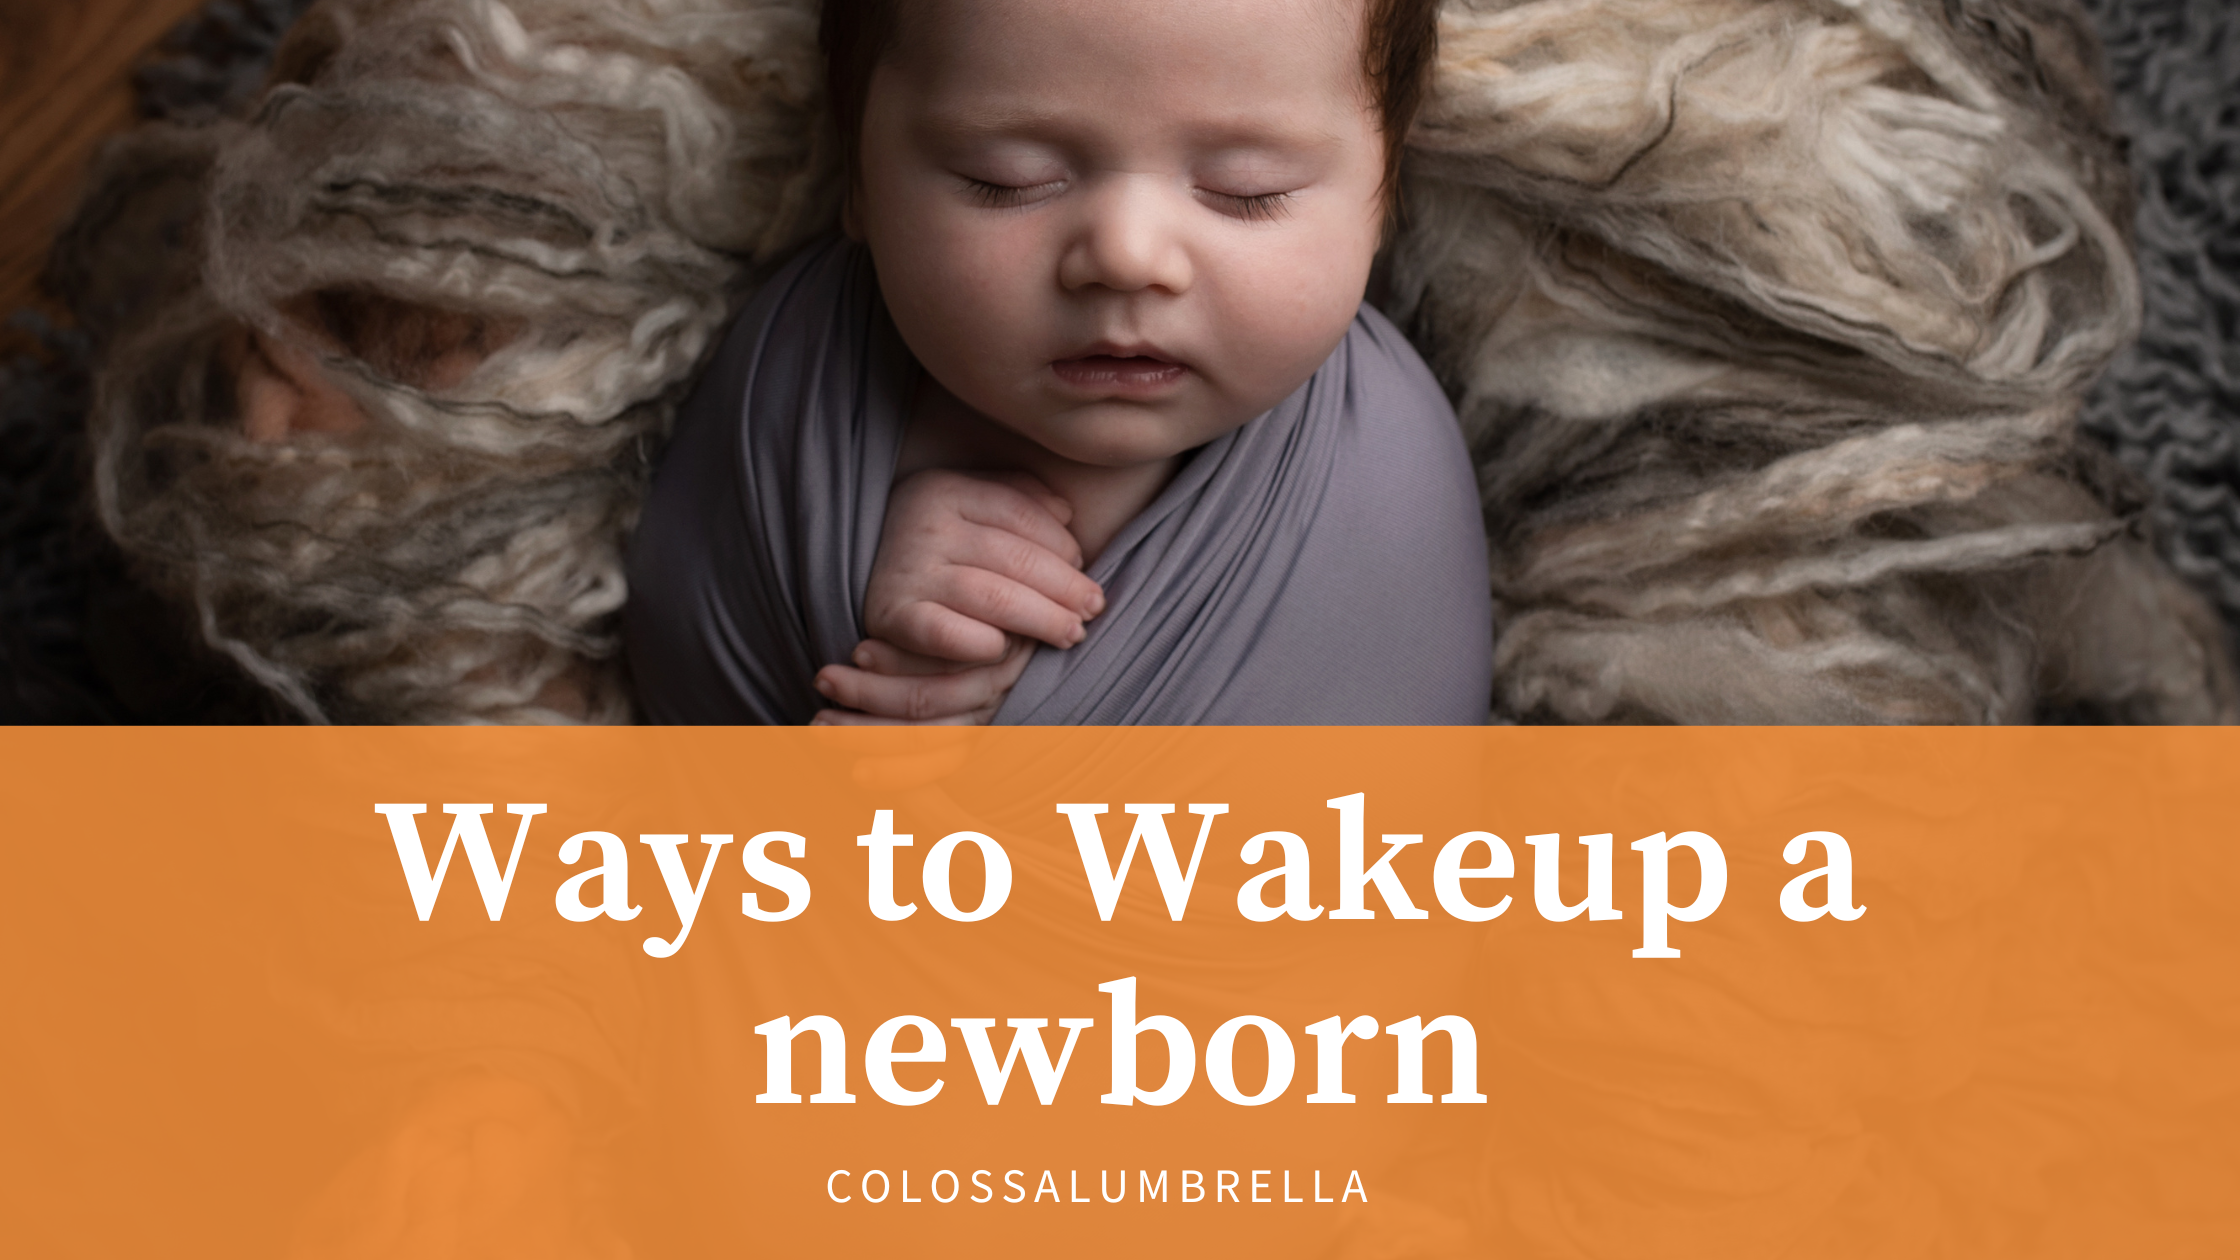 Should I Wake up newborn to feed? If yes, how